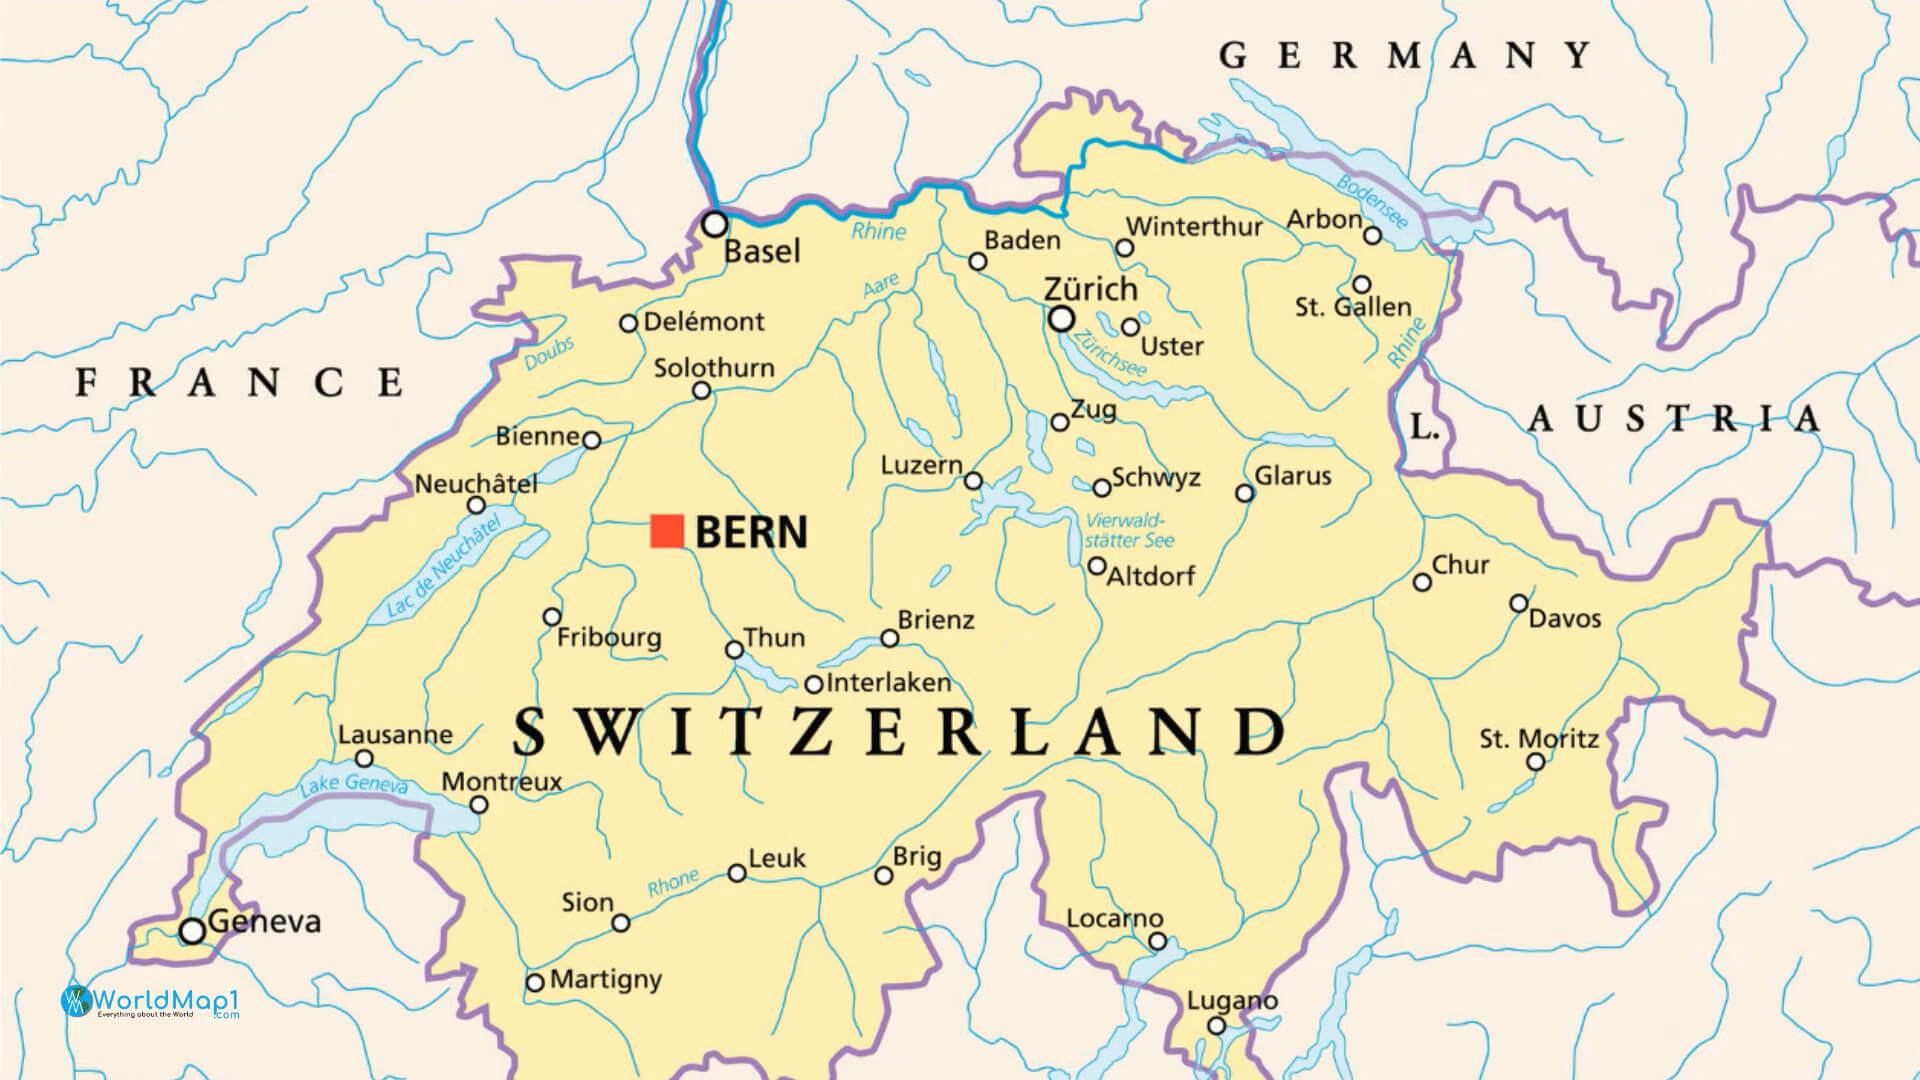 Switzerland Cities and Rivers Map